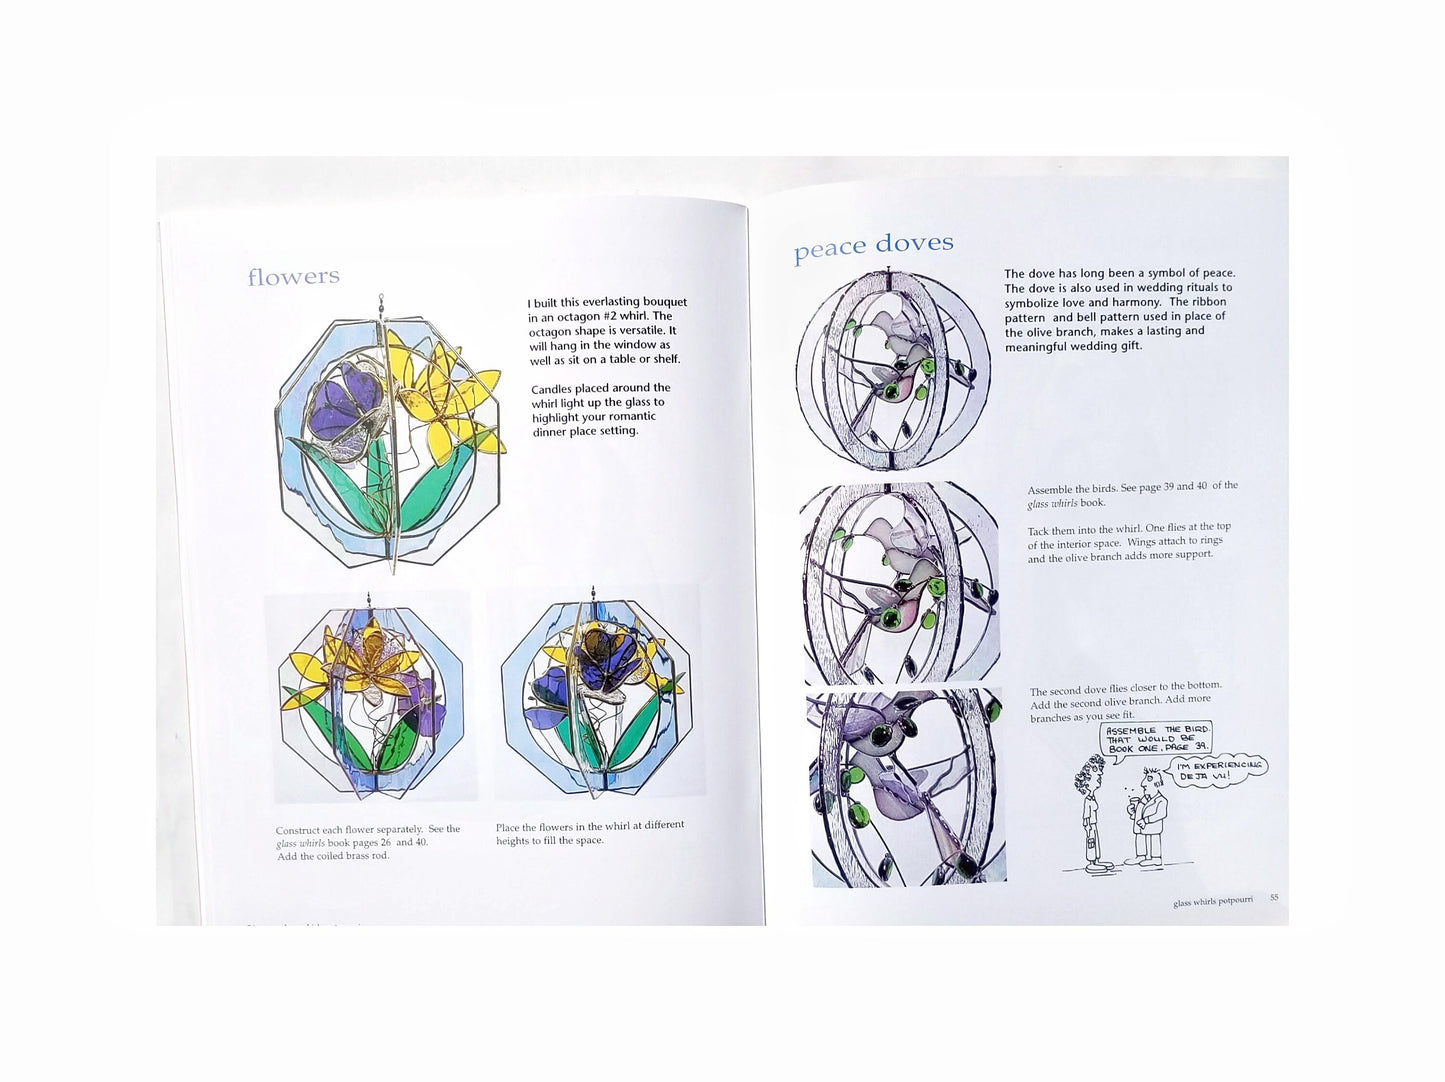 Glass Whirls, Volume 3. Stained Glass 3D, Spinner Projects. Color Photos, Clear Instructions. A Popular Book & Nice Gift for Artists. New.